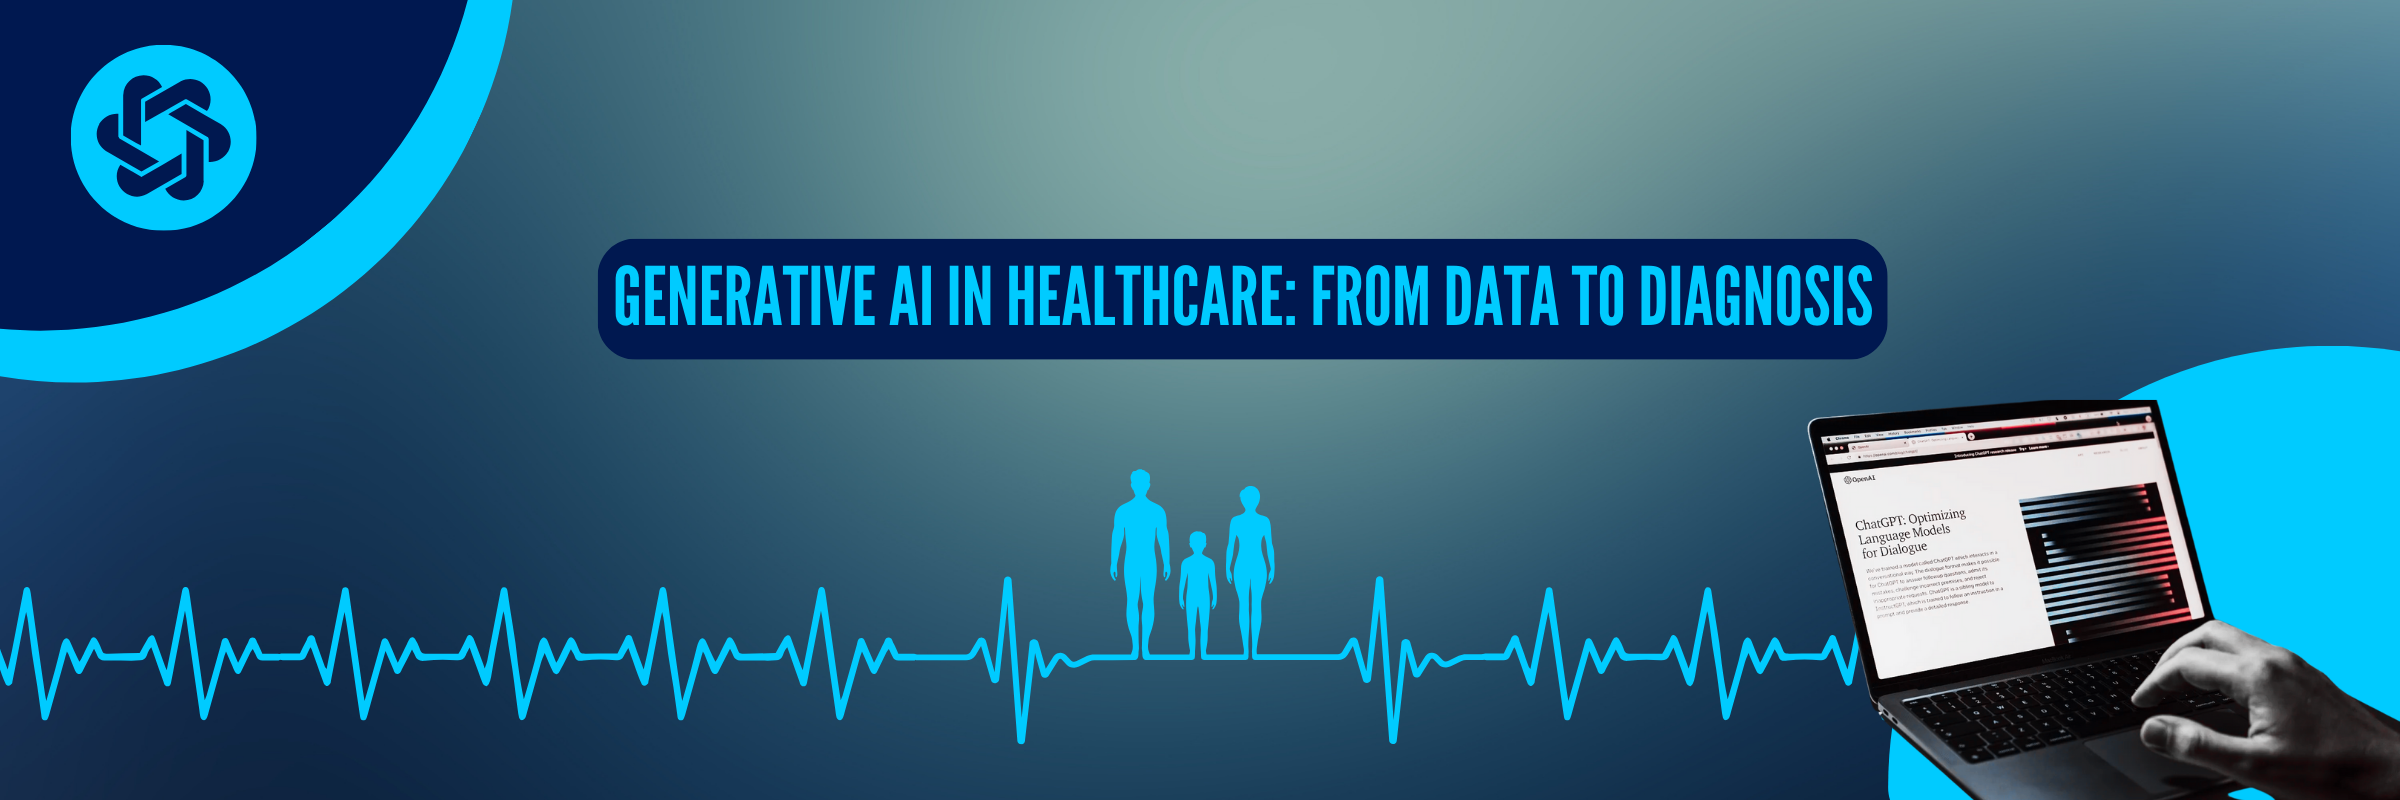 Generative AI in Healthcare: From Data to Diagnosis